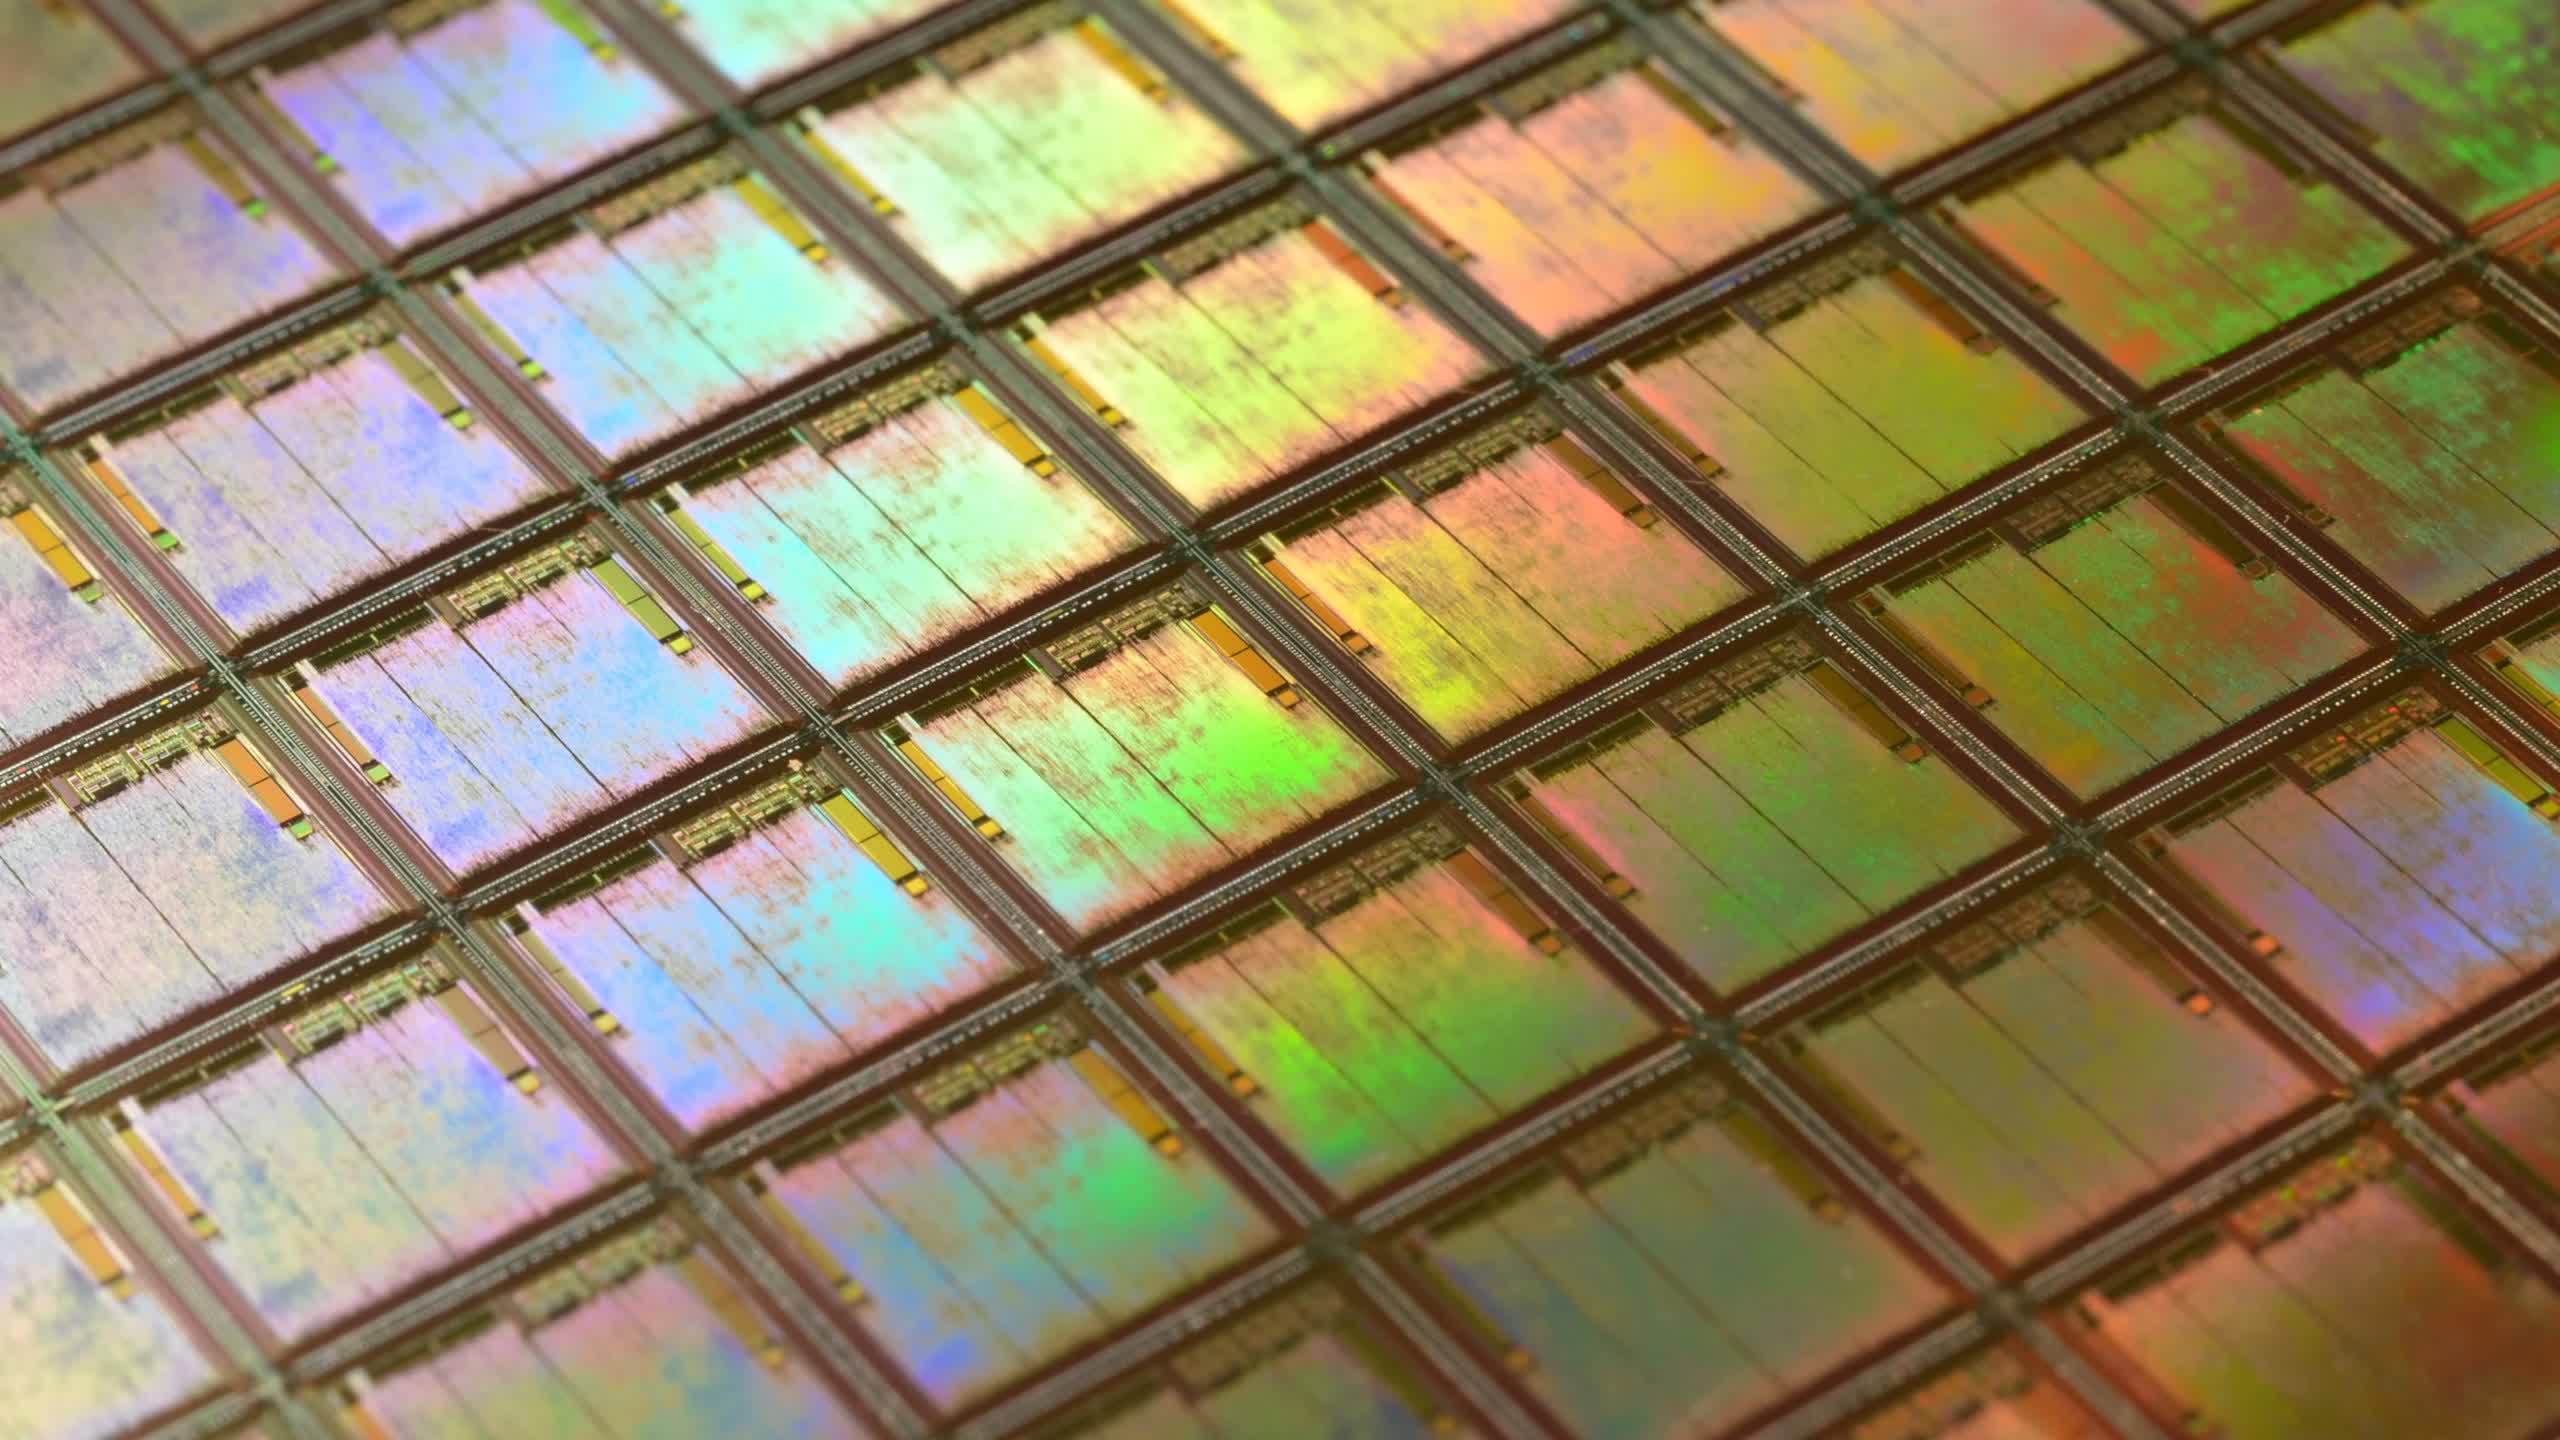 TSMC announces a handful of 3nm process nodes, N2 coming in 2025